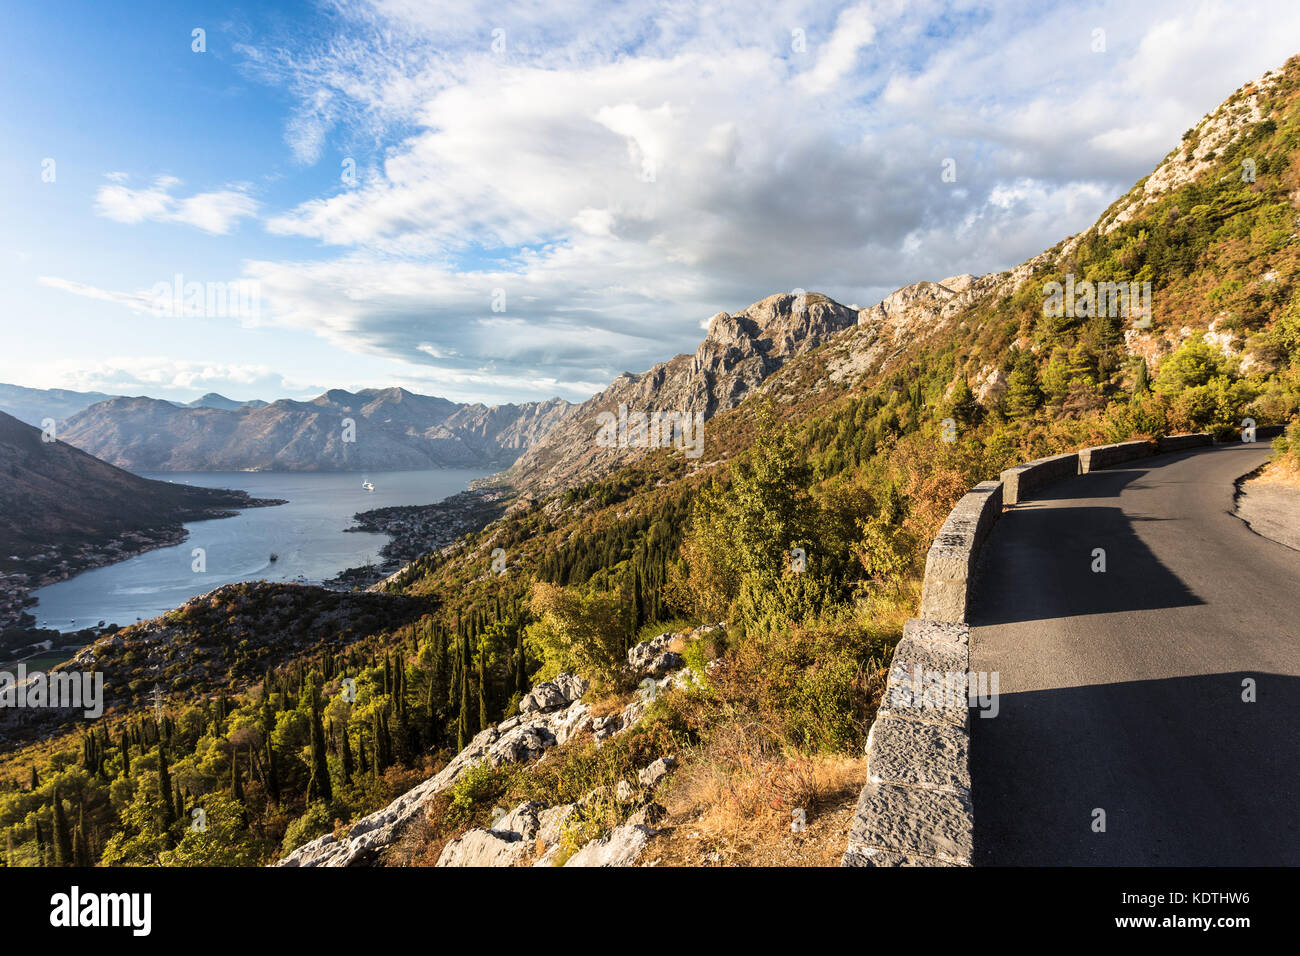 Mountain road above the Kotor bay and old town in Montenegro in the Balkans, Southeastern Europe Stock Photo